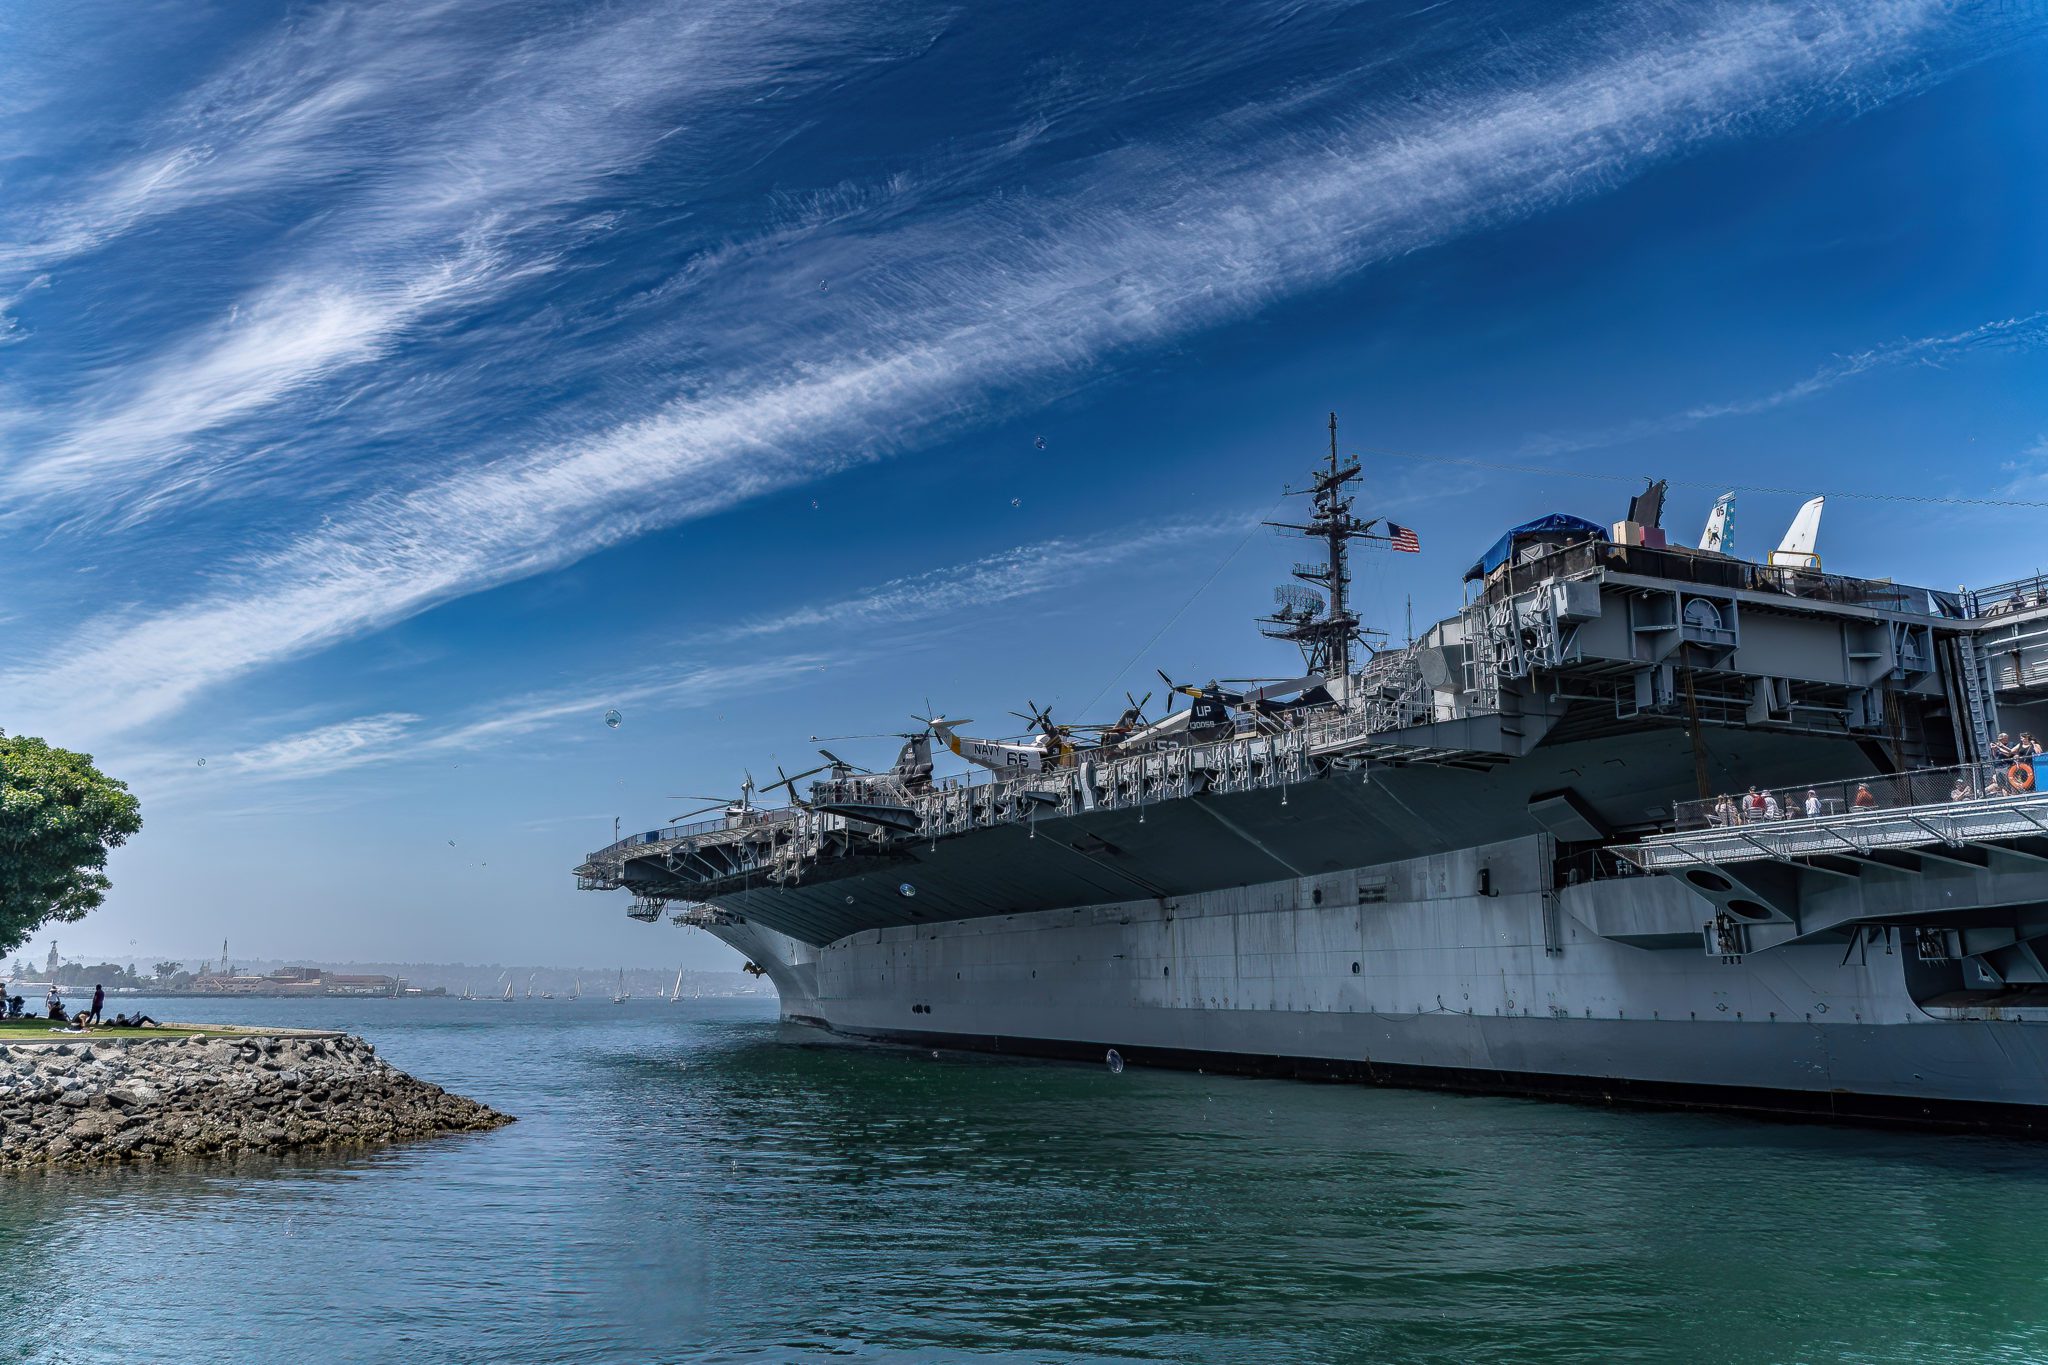 Uss midway carrier